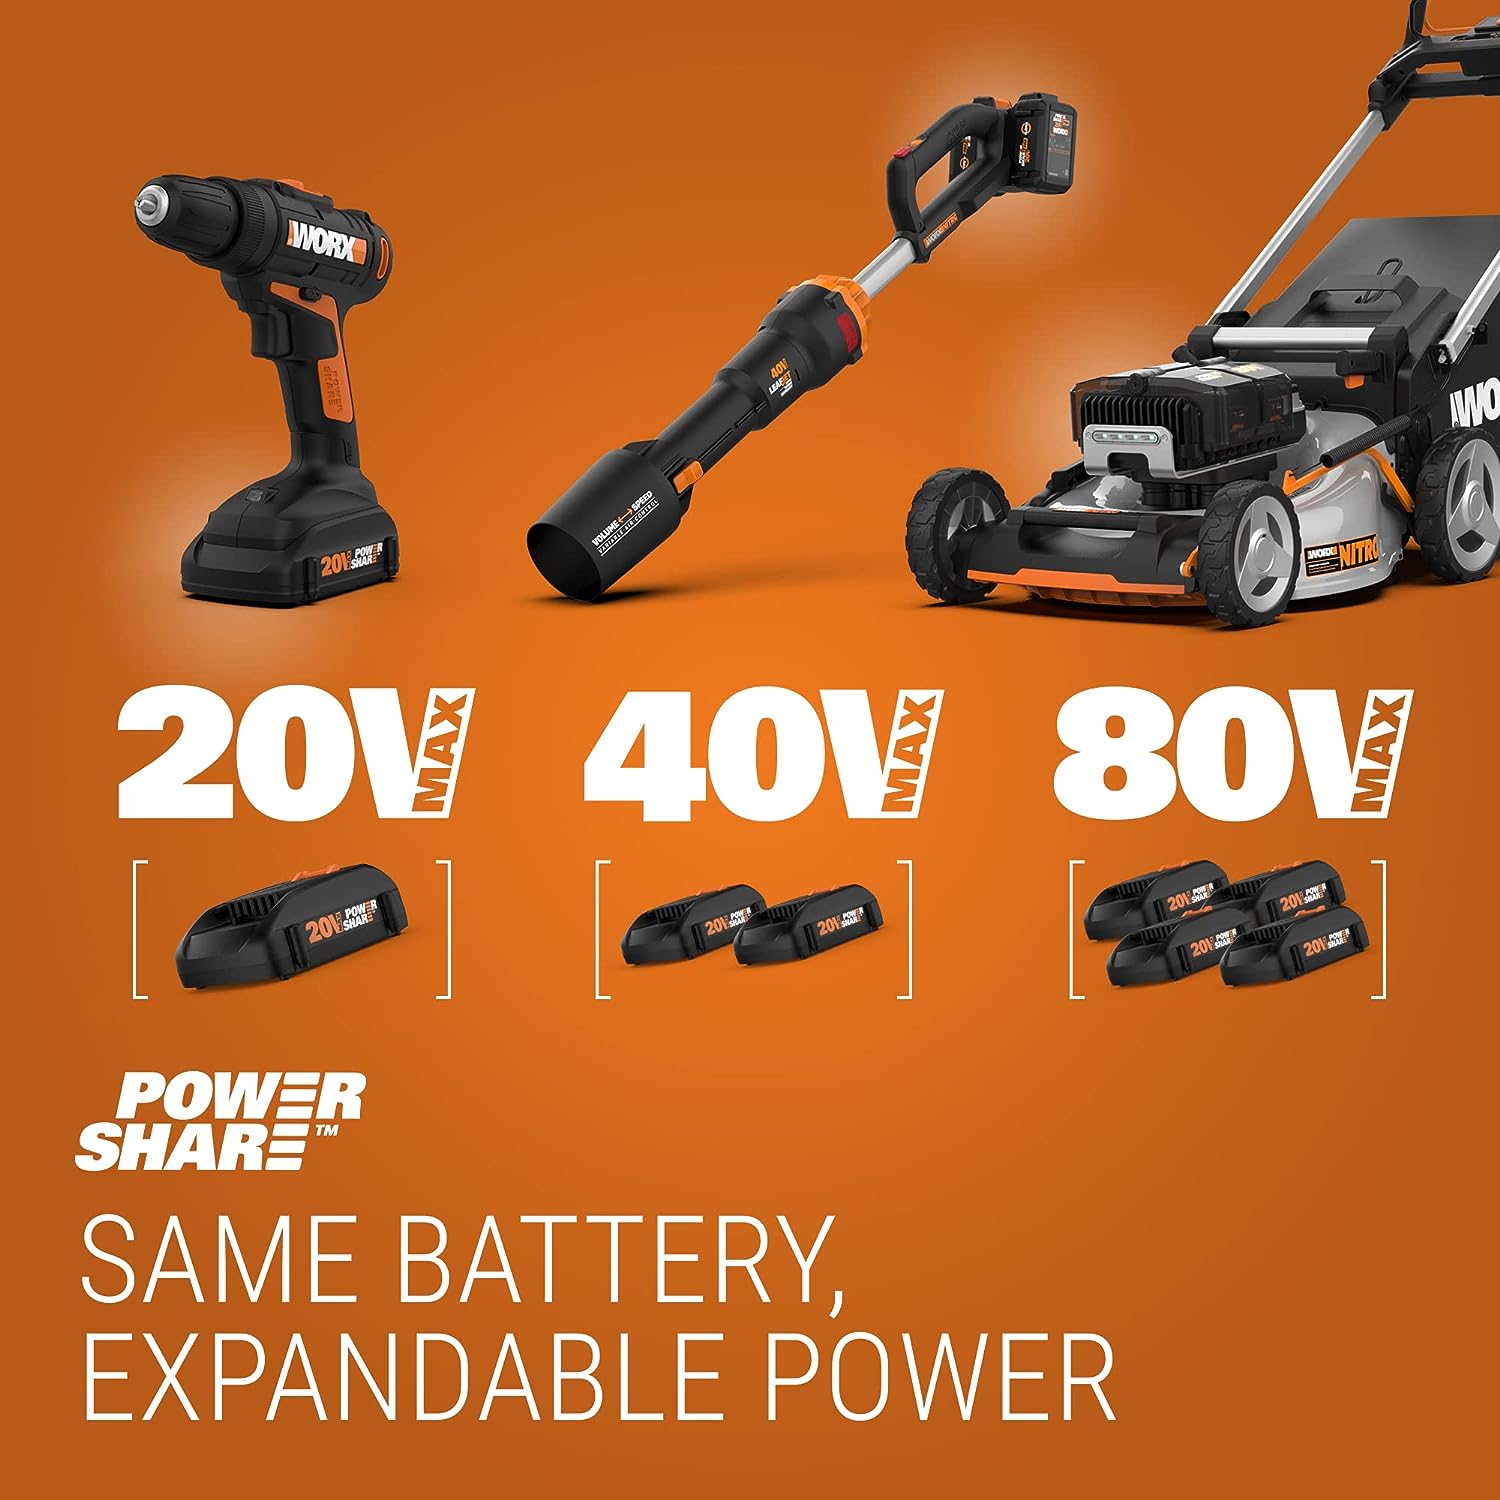 https://bigbigmart.com/wp-content/uploads/2023/10/Worx-20V-2-Speed-Leaf-Blower-Cordless-with-Battery-and-Charger-Blowers-for-Lawn-Care-with-Turbine-Fan-Compact-Lightweight-Cordless-Leaf-Blower-WG547.9-%E2%80%93-Tool-Only6.jpg